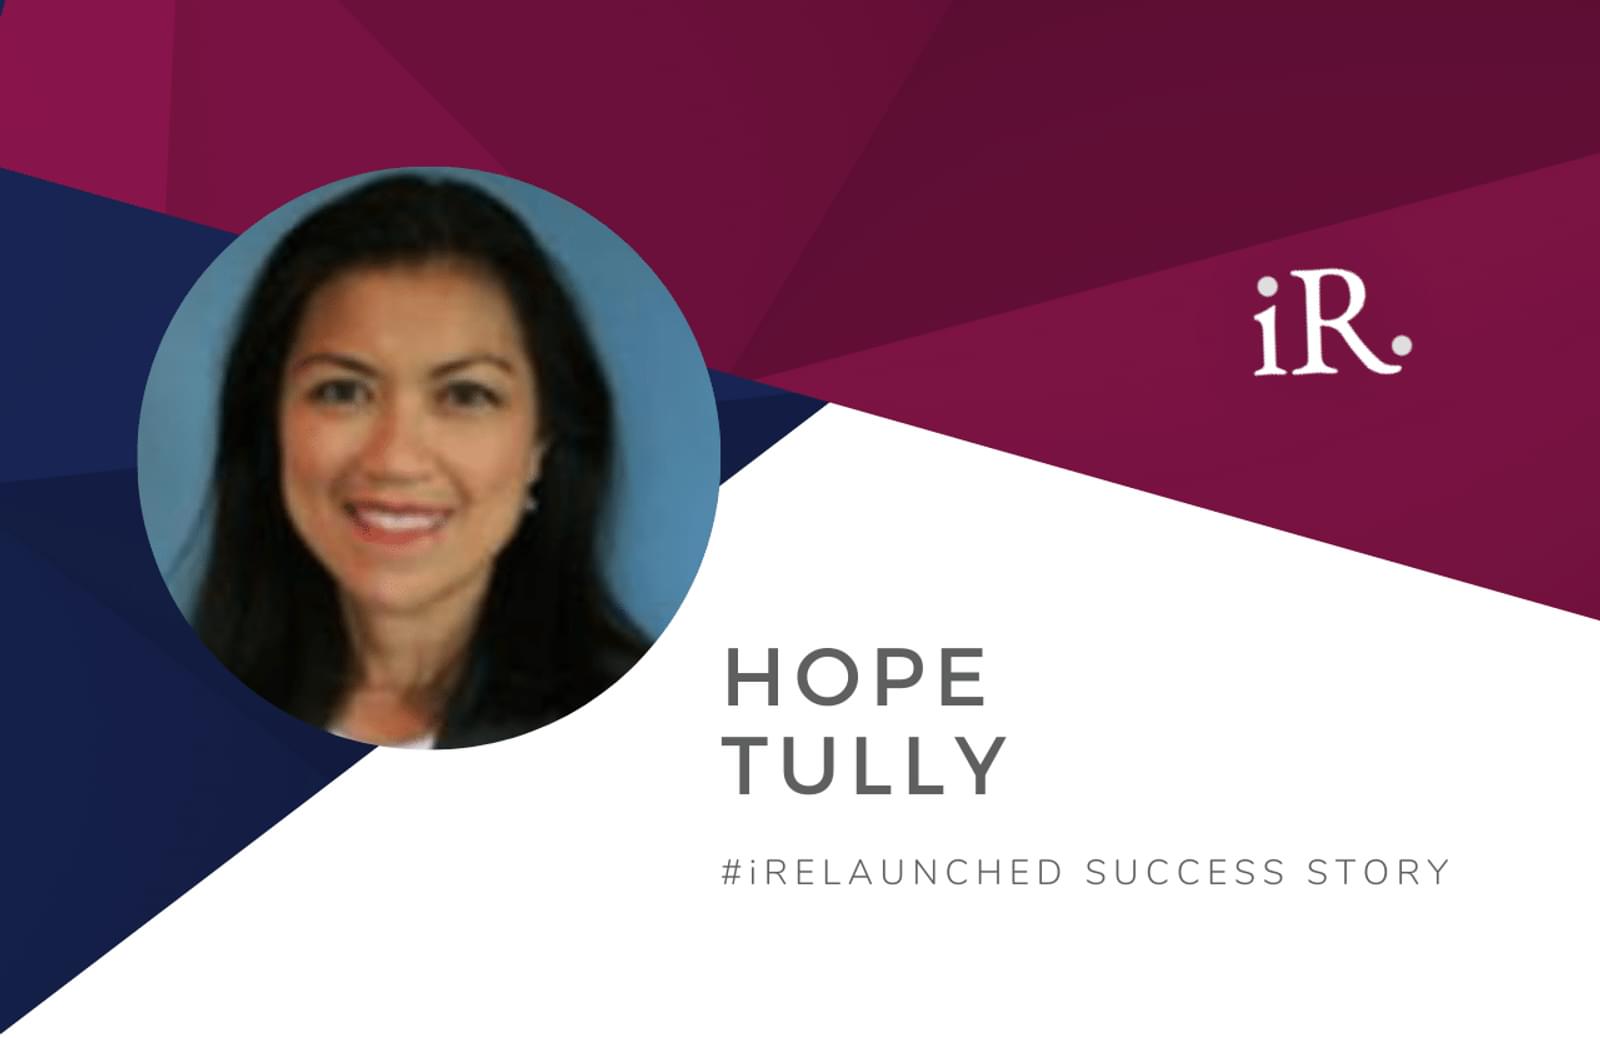 Hope Tully's headshot and the text #iRelaunched Success Story along with the iRelaunch logo.  A navy and maroon geometric textured background intersect behind Hope's headshot.